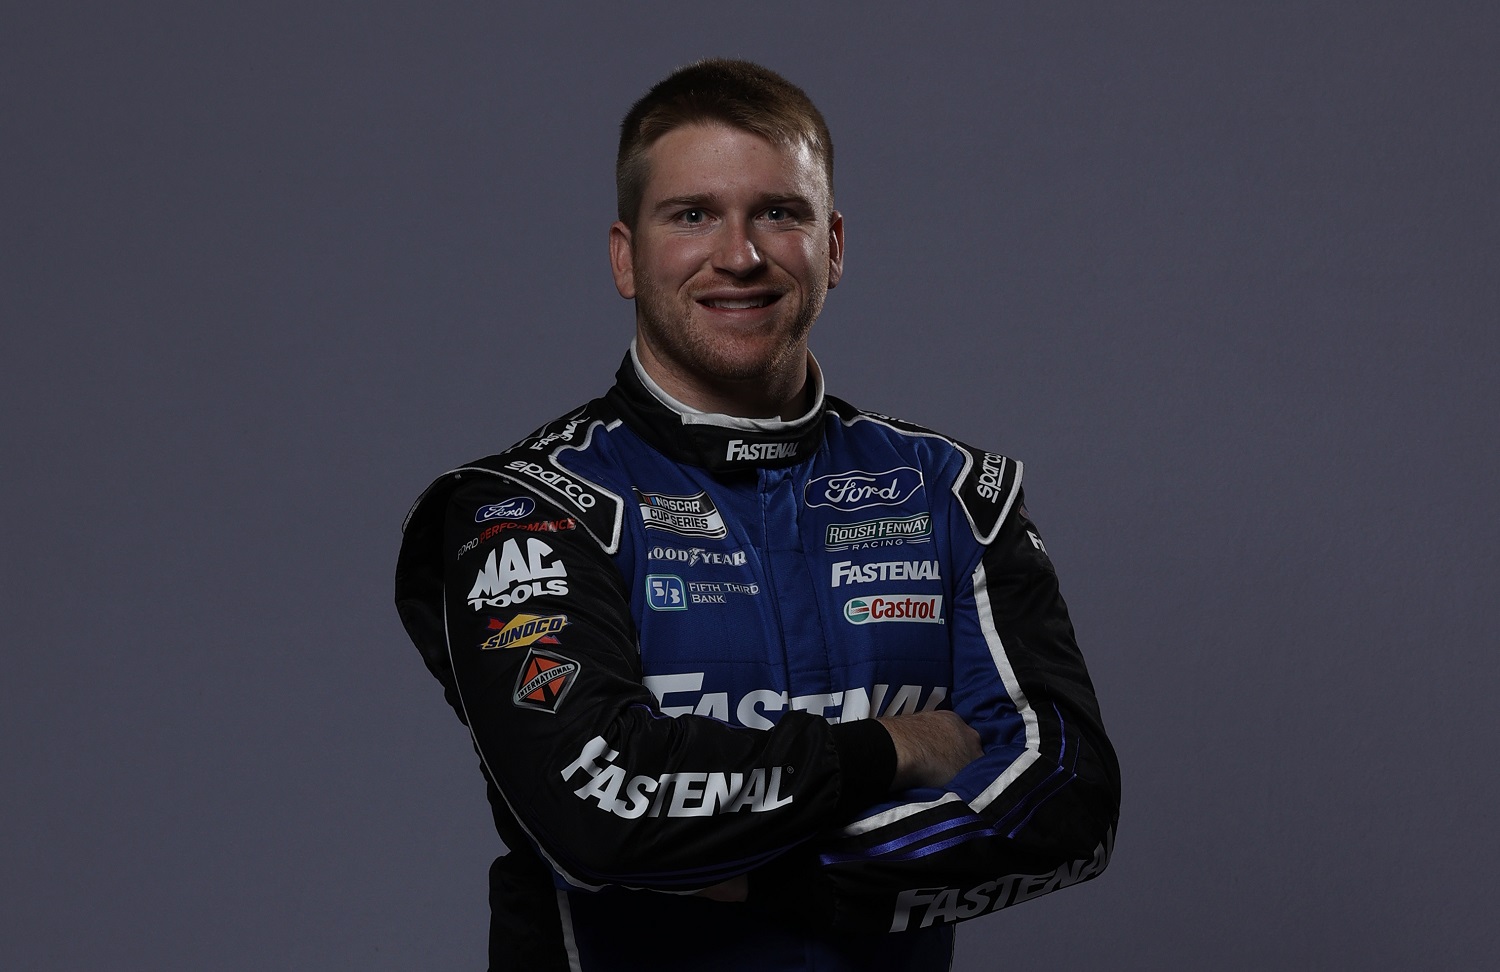 Chris Buescher poses for a photo during NASCAR Production Days at Fox Sports Studios on Jan. 19, 2021, in Charlotte, North Carolina. | Chris Graythen/Getty Images